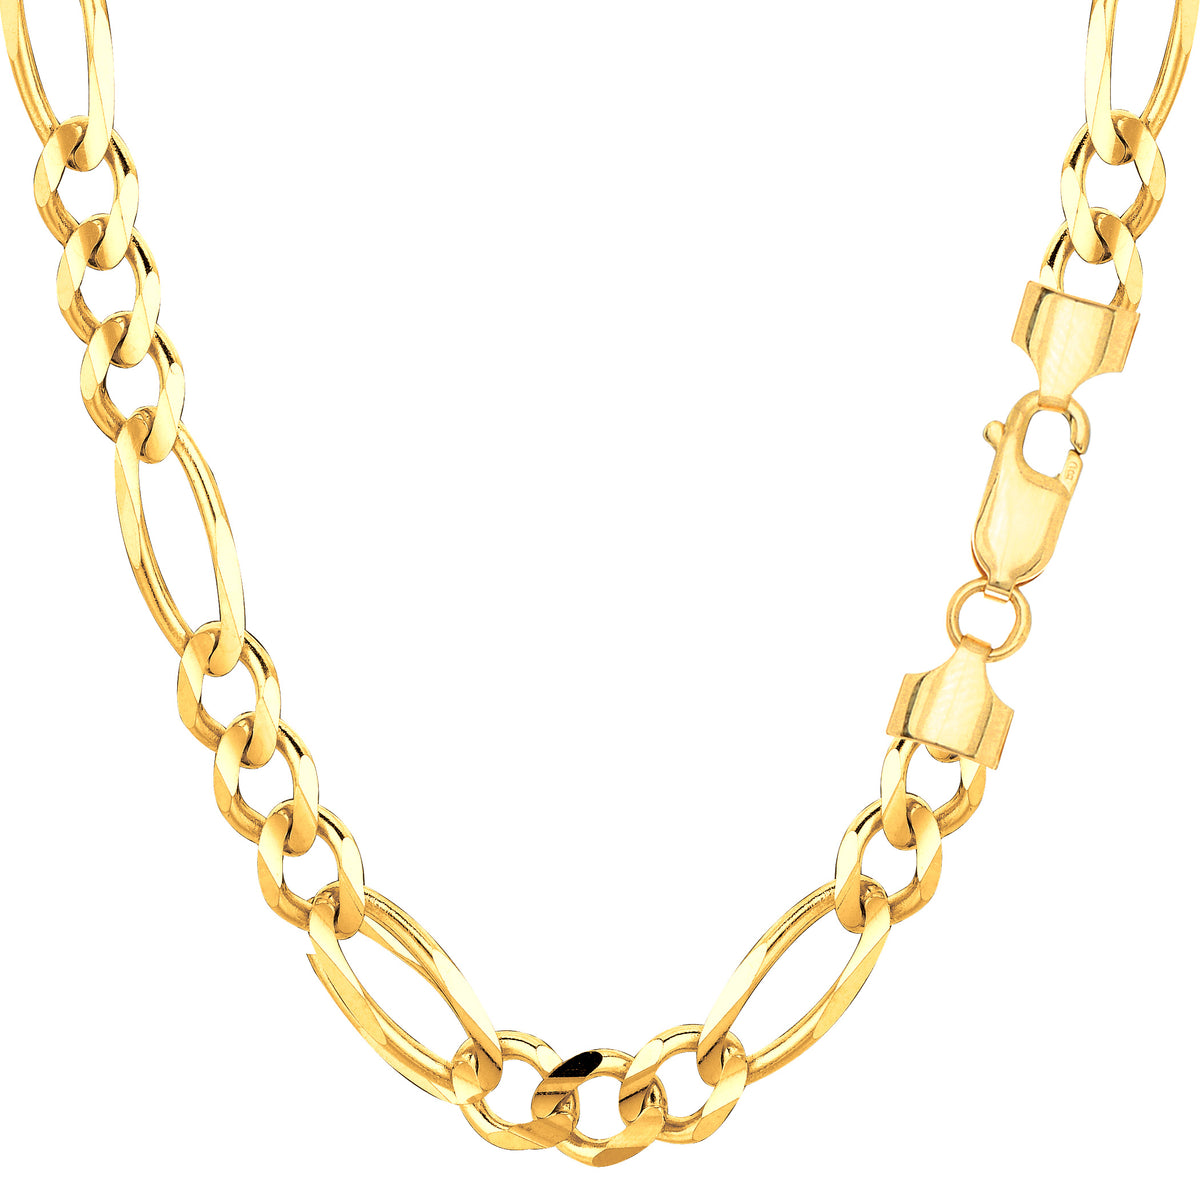 10k Yellow Solid Gold Figaro Chain Bracelet, 5.0mm, 8.5" fine designer jewelry for men and women